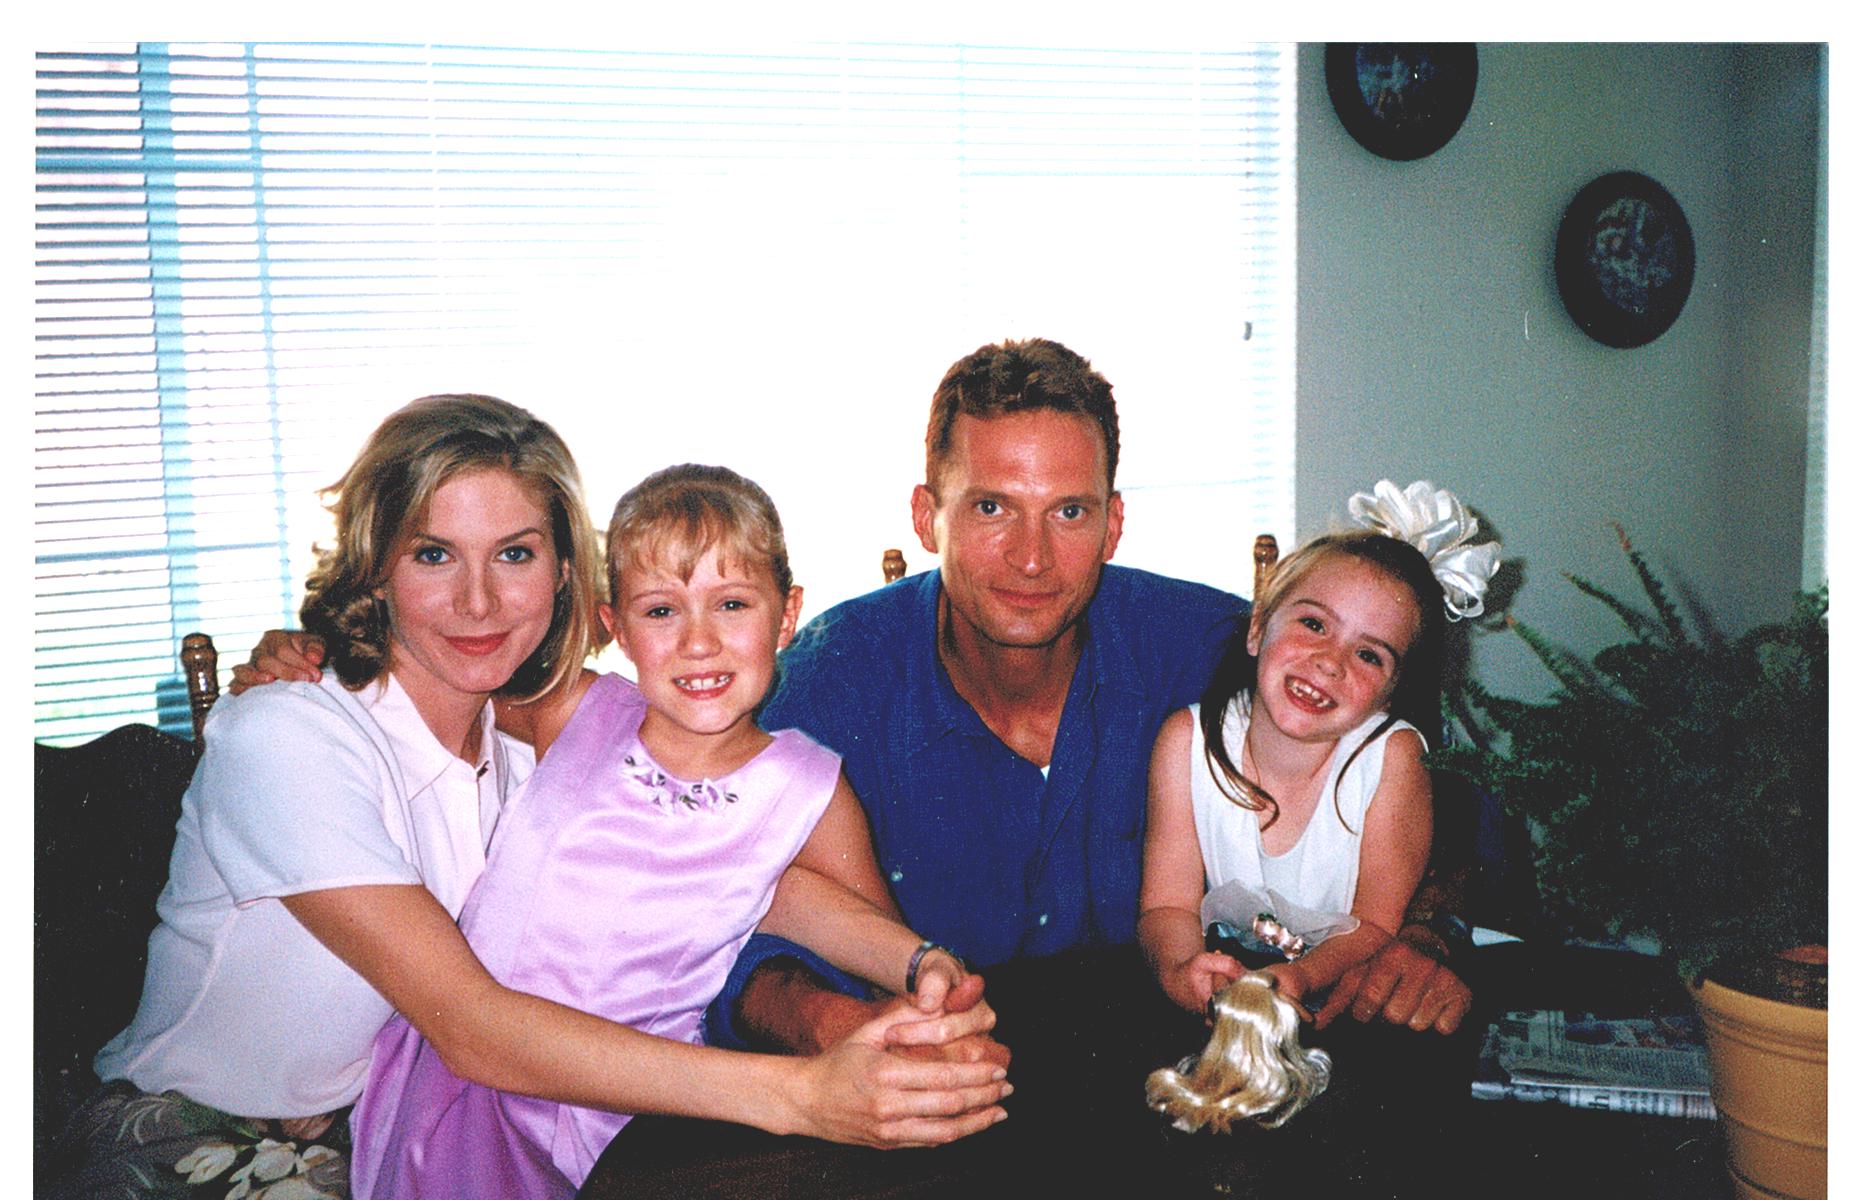 On the set of JAG: The Court-Martial of Sandra Gilbert (1997 TV episode): Elizabeth Mitchell, Aria Noelle Curzon, Rex Smith, and Camryn Grimes